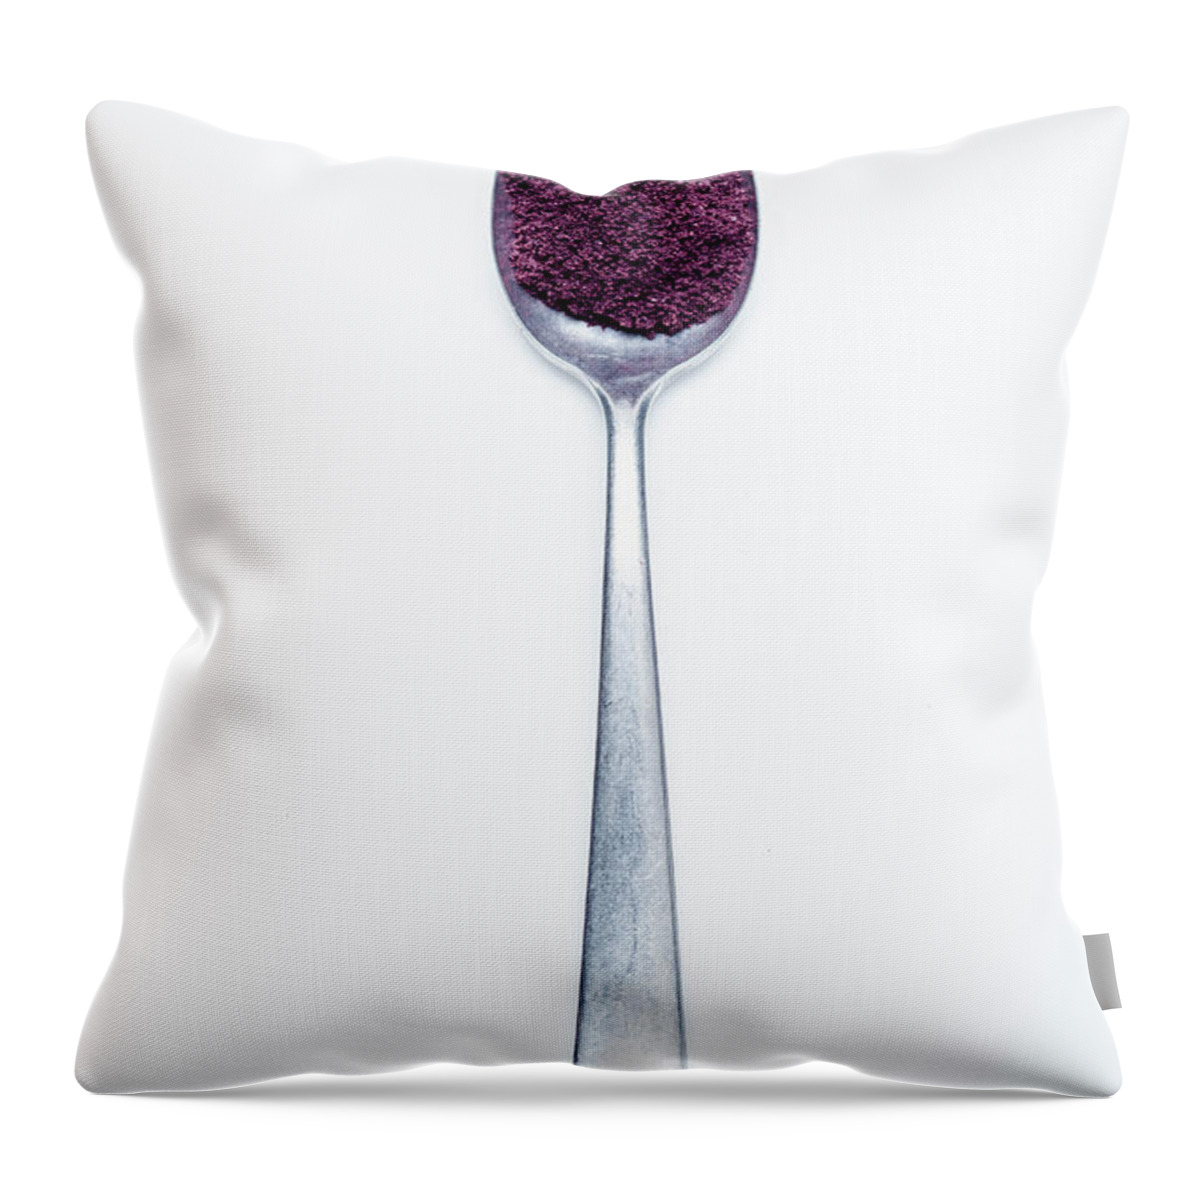 Ip_12429555 Throw Pillow featuring the photograph Acai Berry Powder On A Spoon Against A White Background by Eising Studio